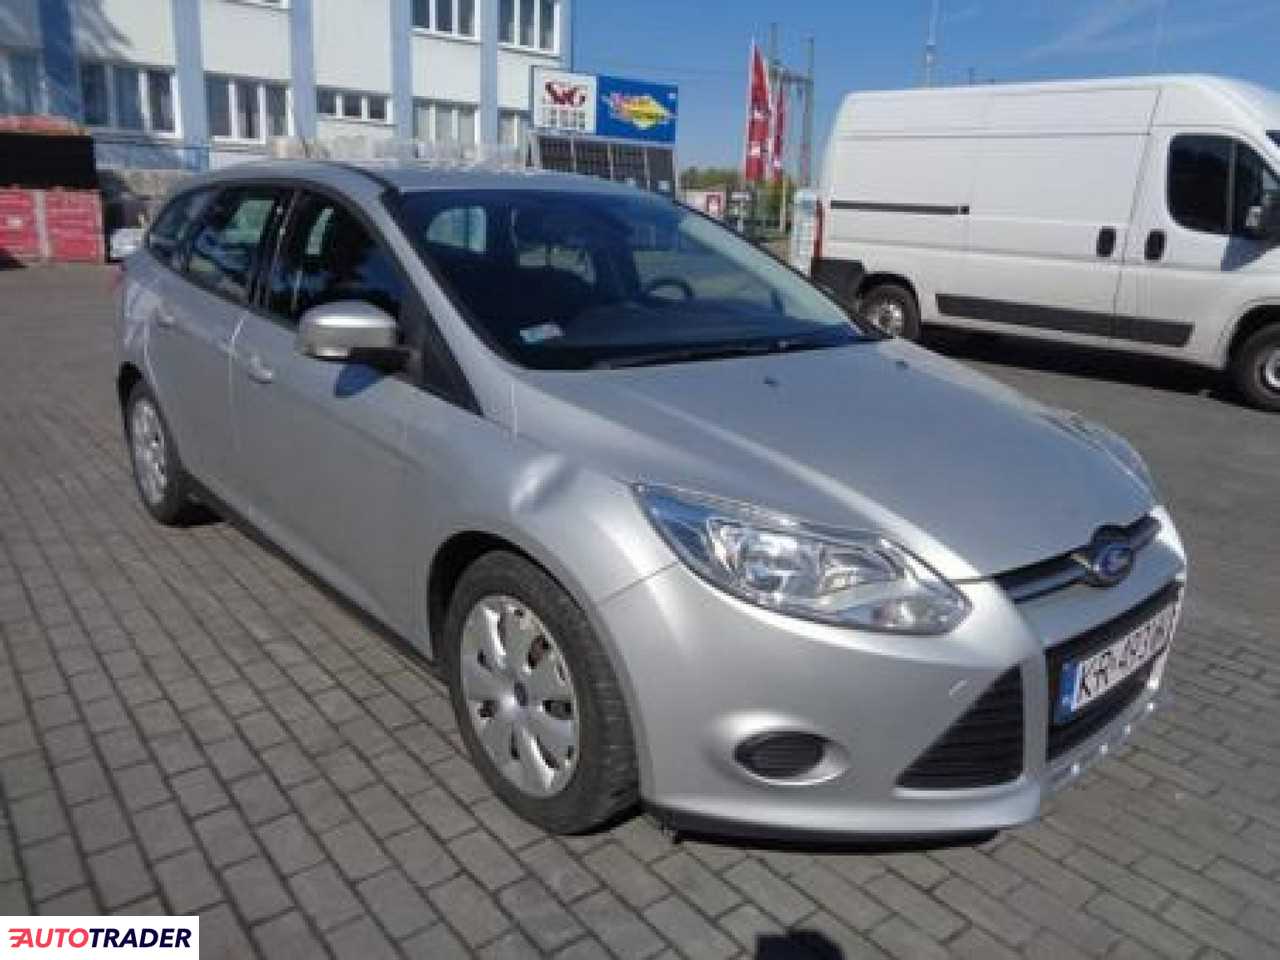 Ford Focus 2013 1.6 95 KM